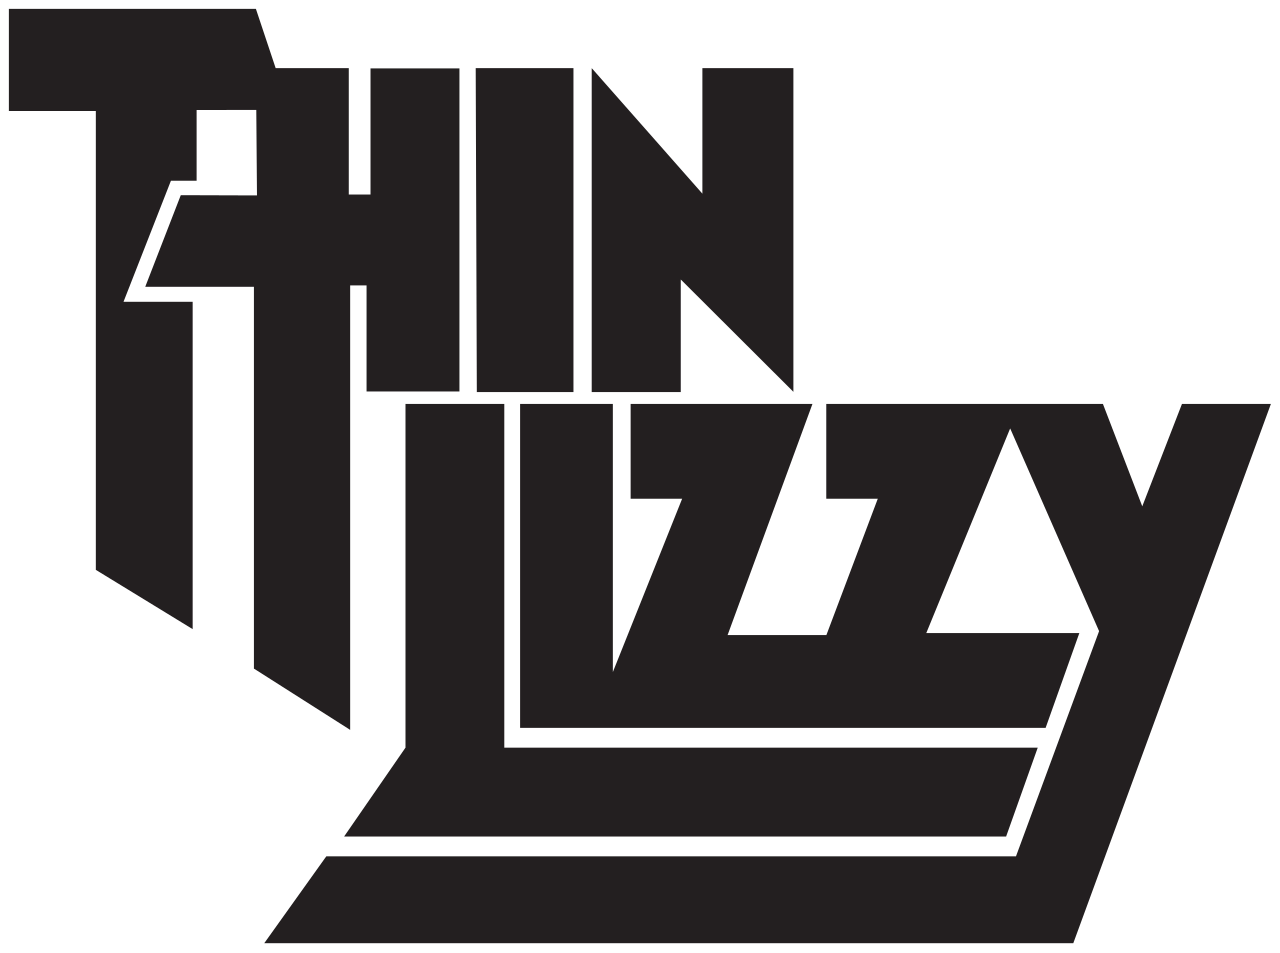 Thin Lizzy Logo.svg.png